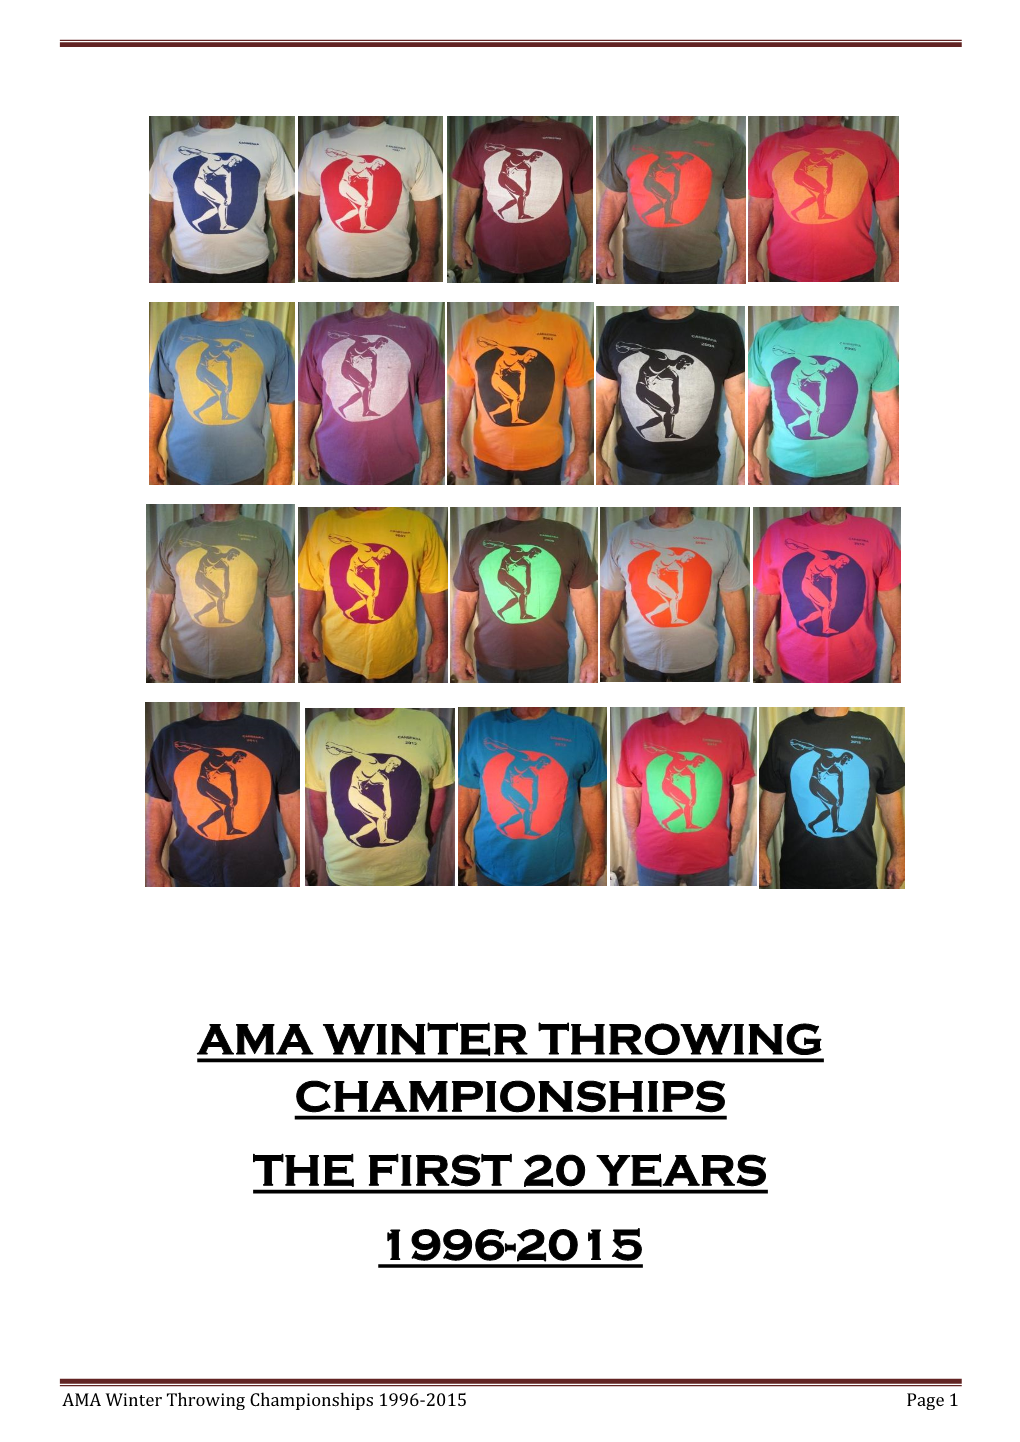 Ama Winter Throwing Championships the First 20 Years 1996-2015